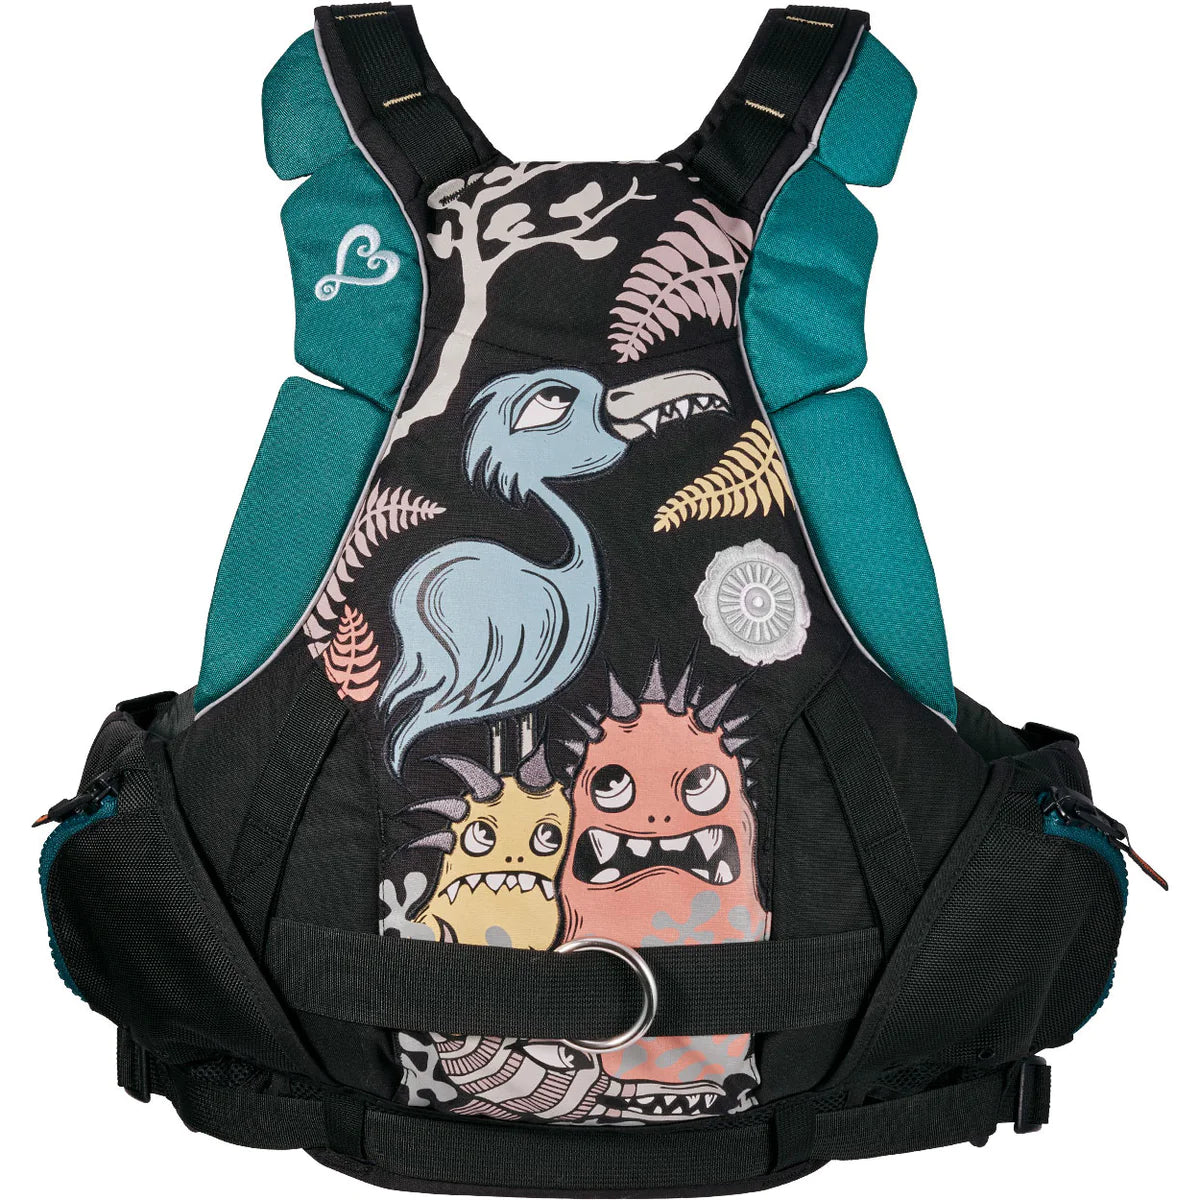 Astral GreenJacket PFD - Limited Edition 2023 Wild Things